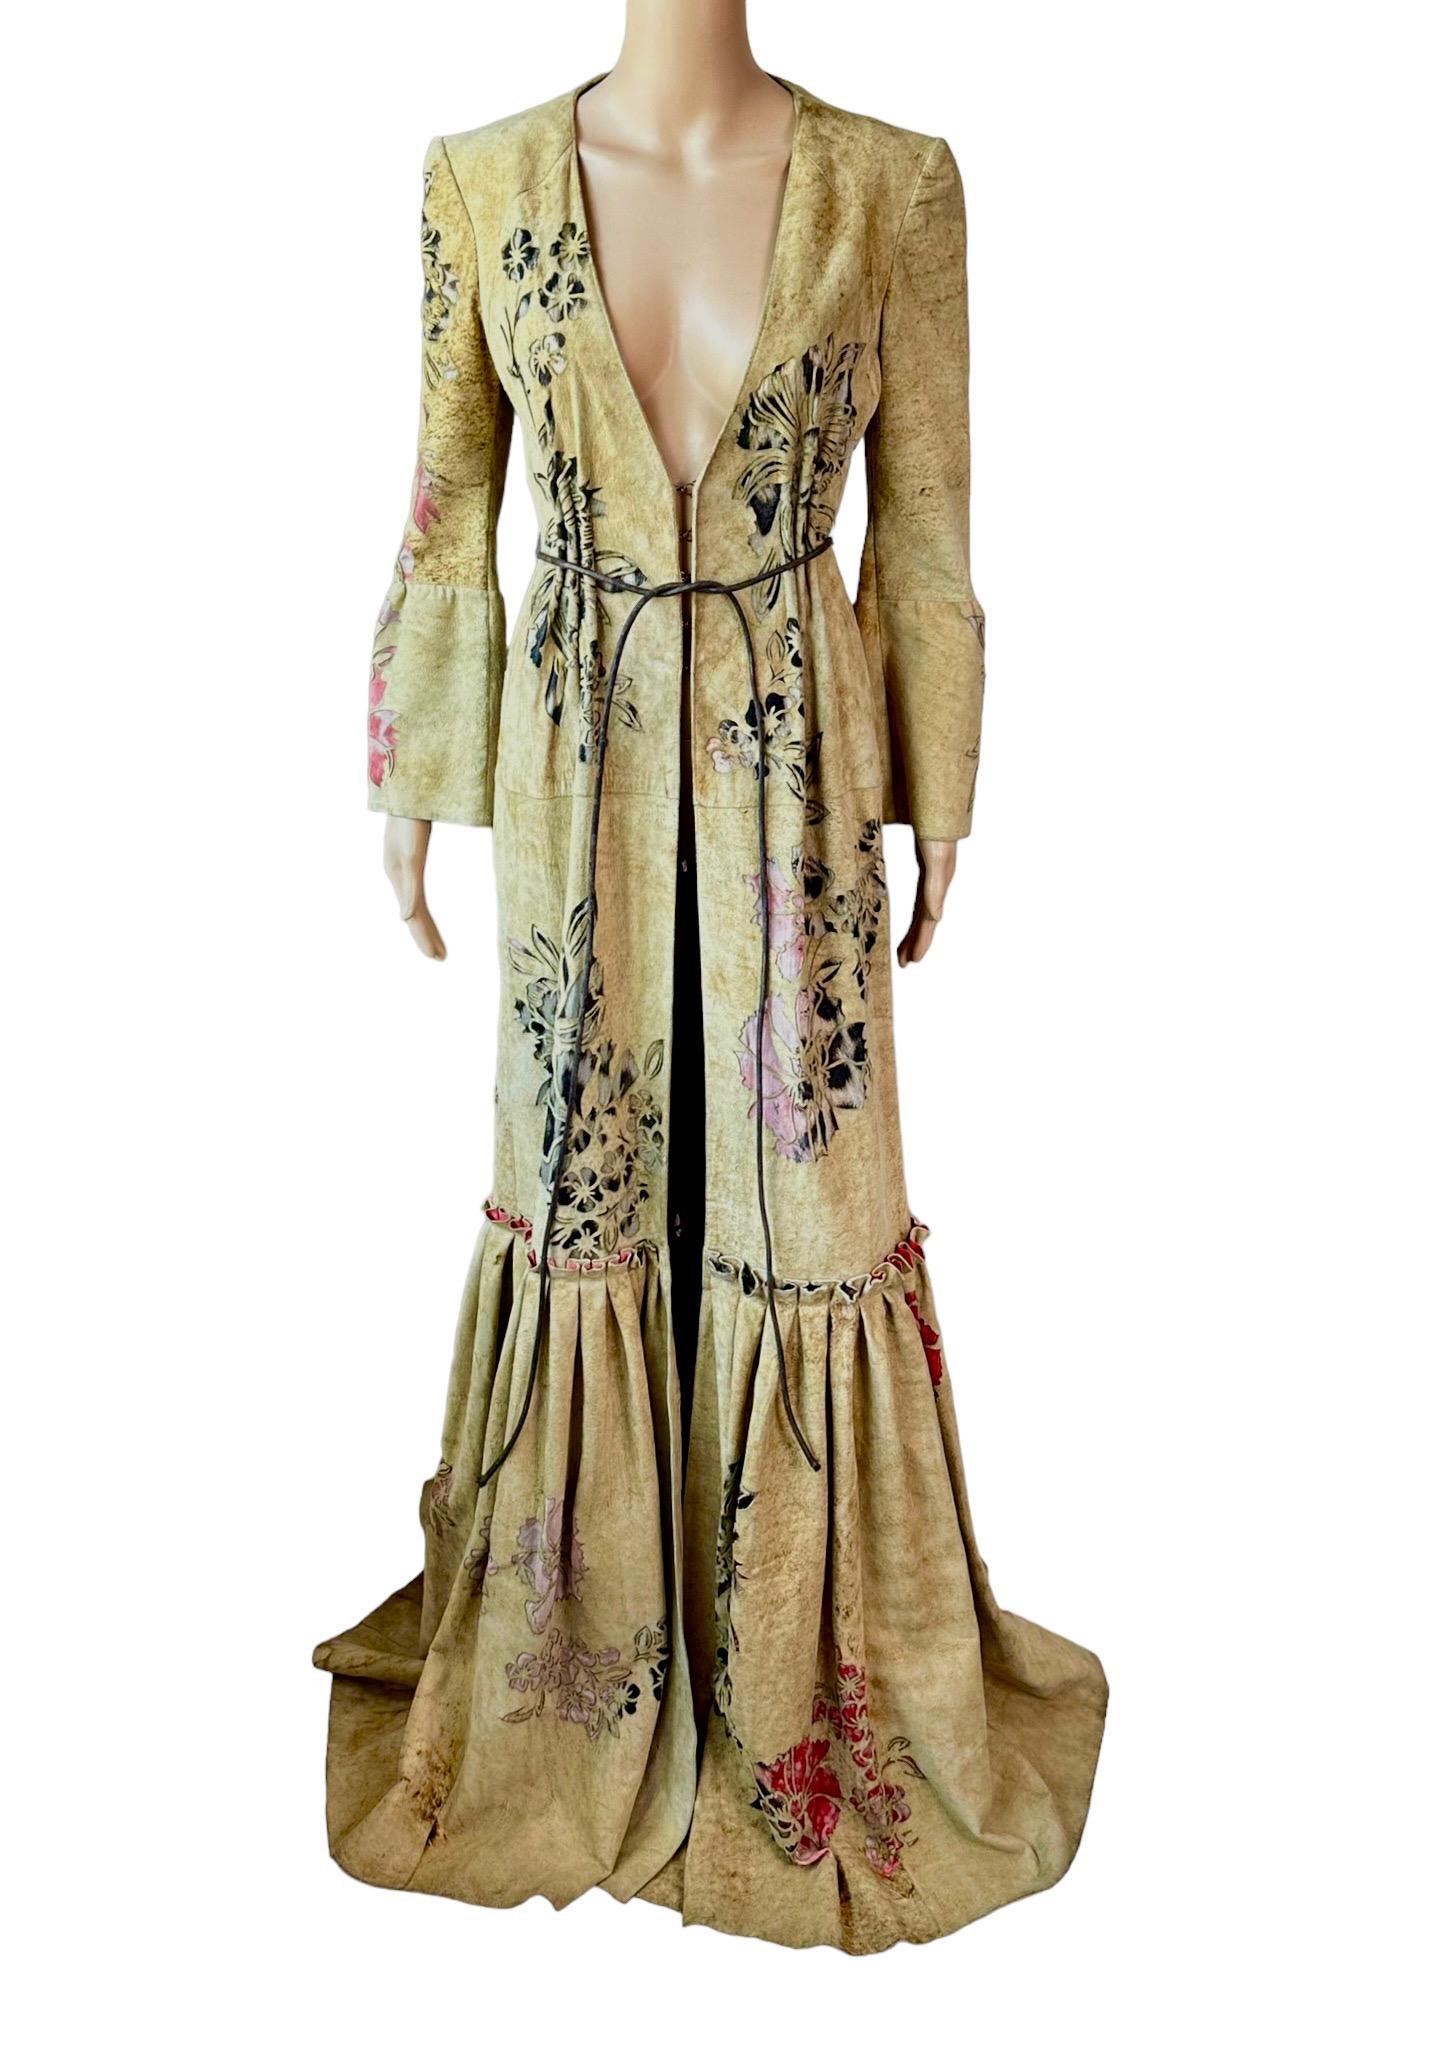 Roberto Cavalli S/S 2002 Runway Leather Lasercut Floral Dress Jacket Coat  In Good Condition In Naples, FL